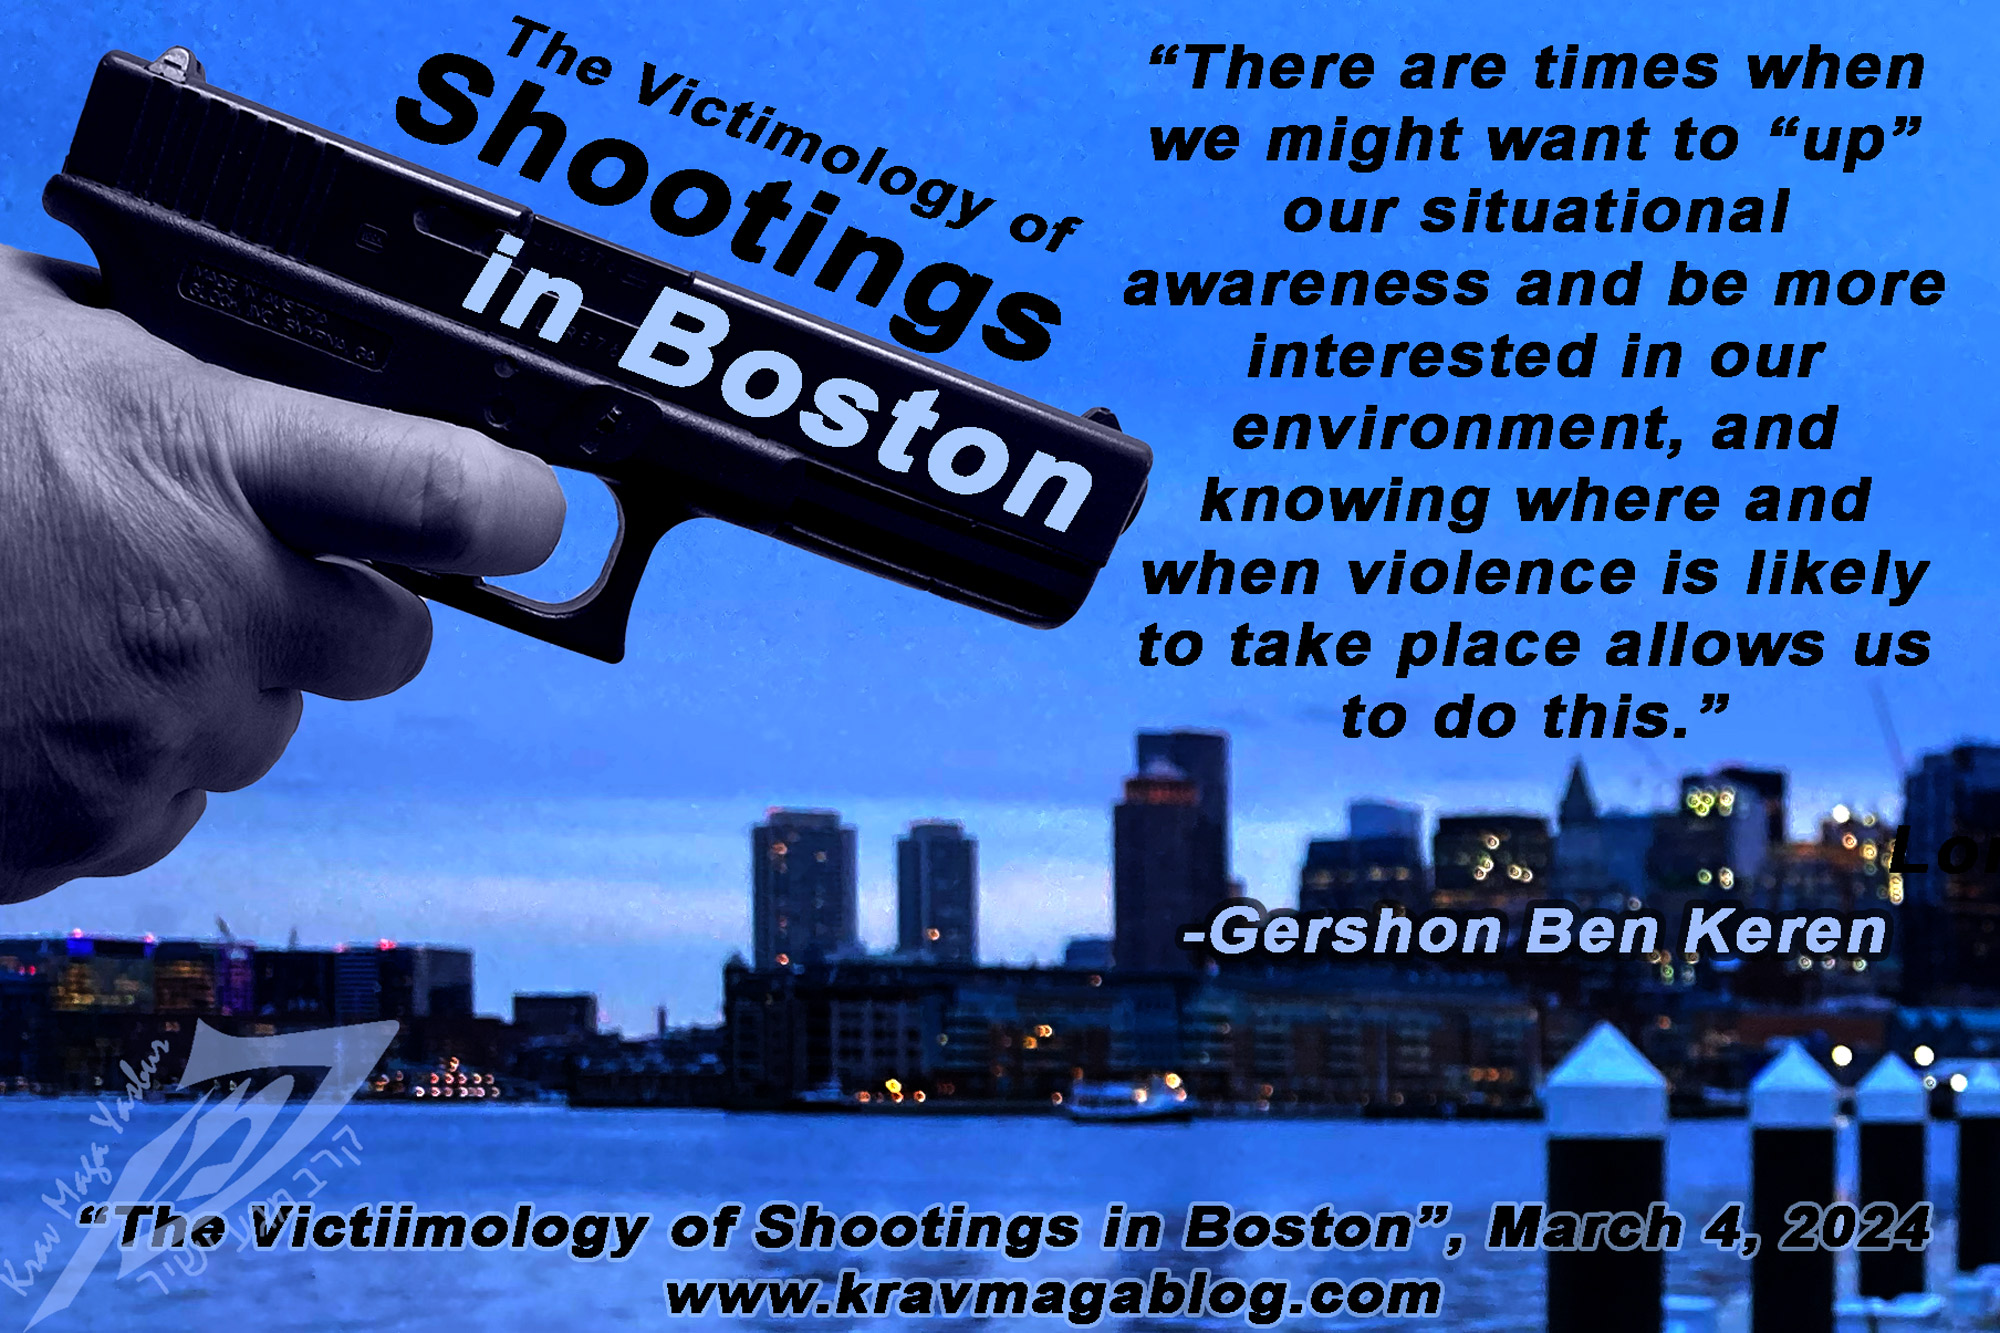 The Victimology of Shootings in Boston